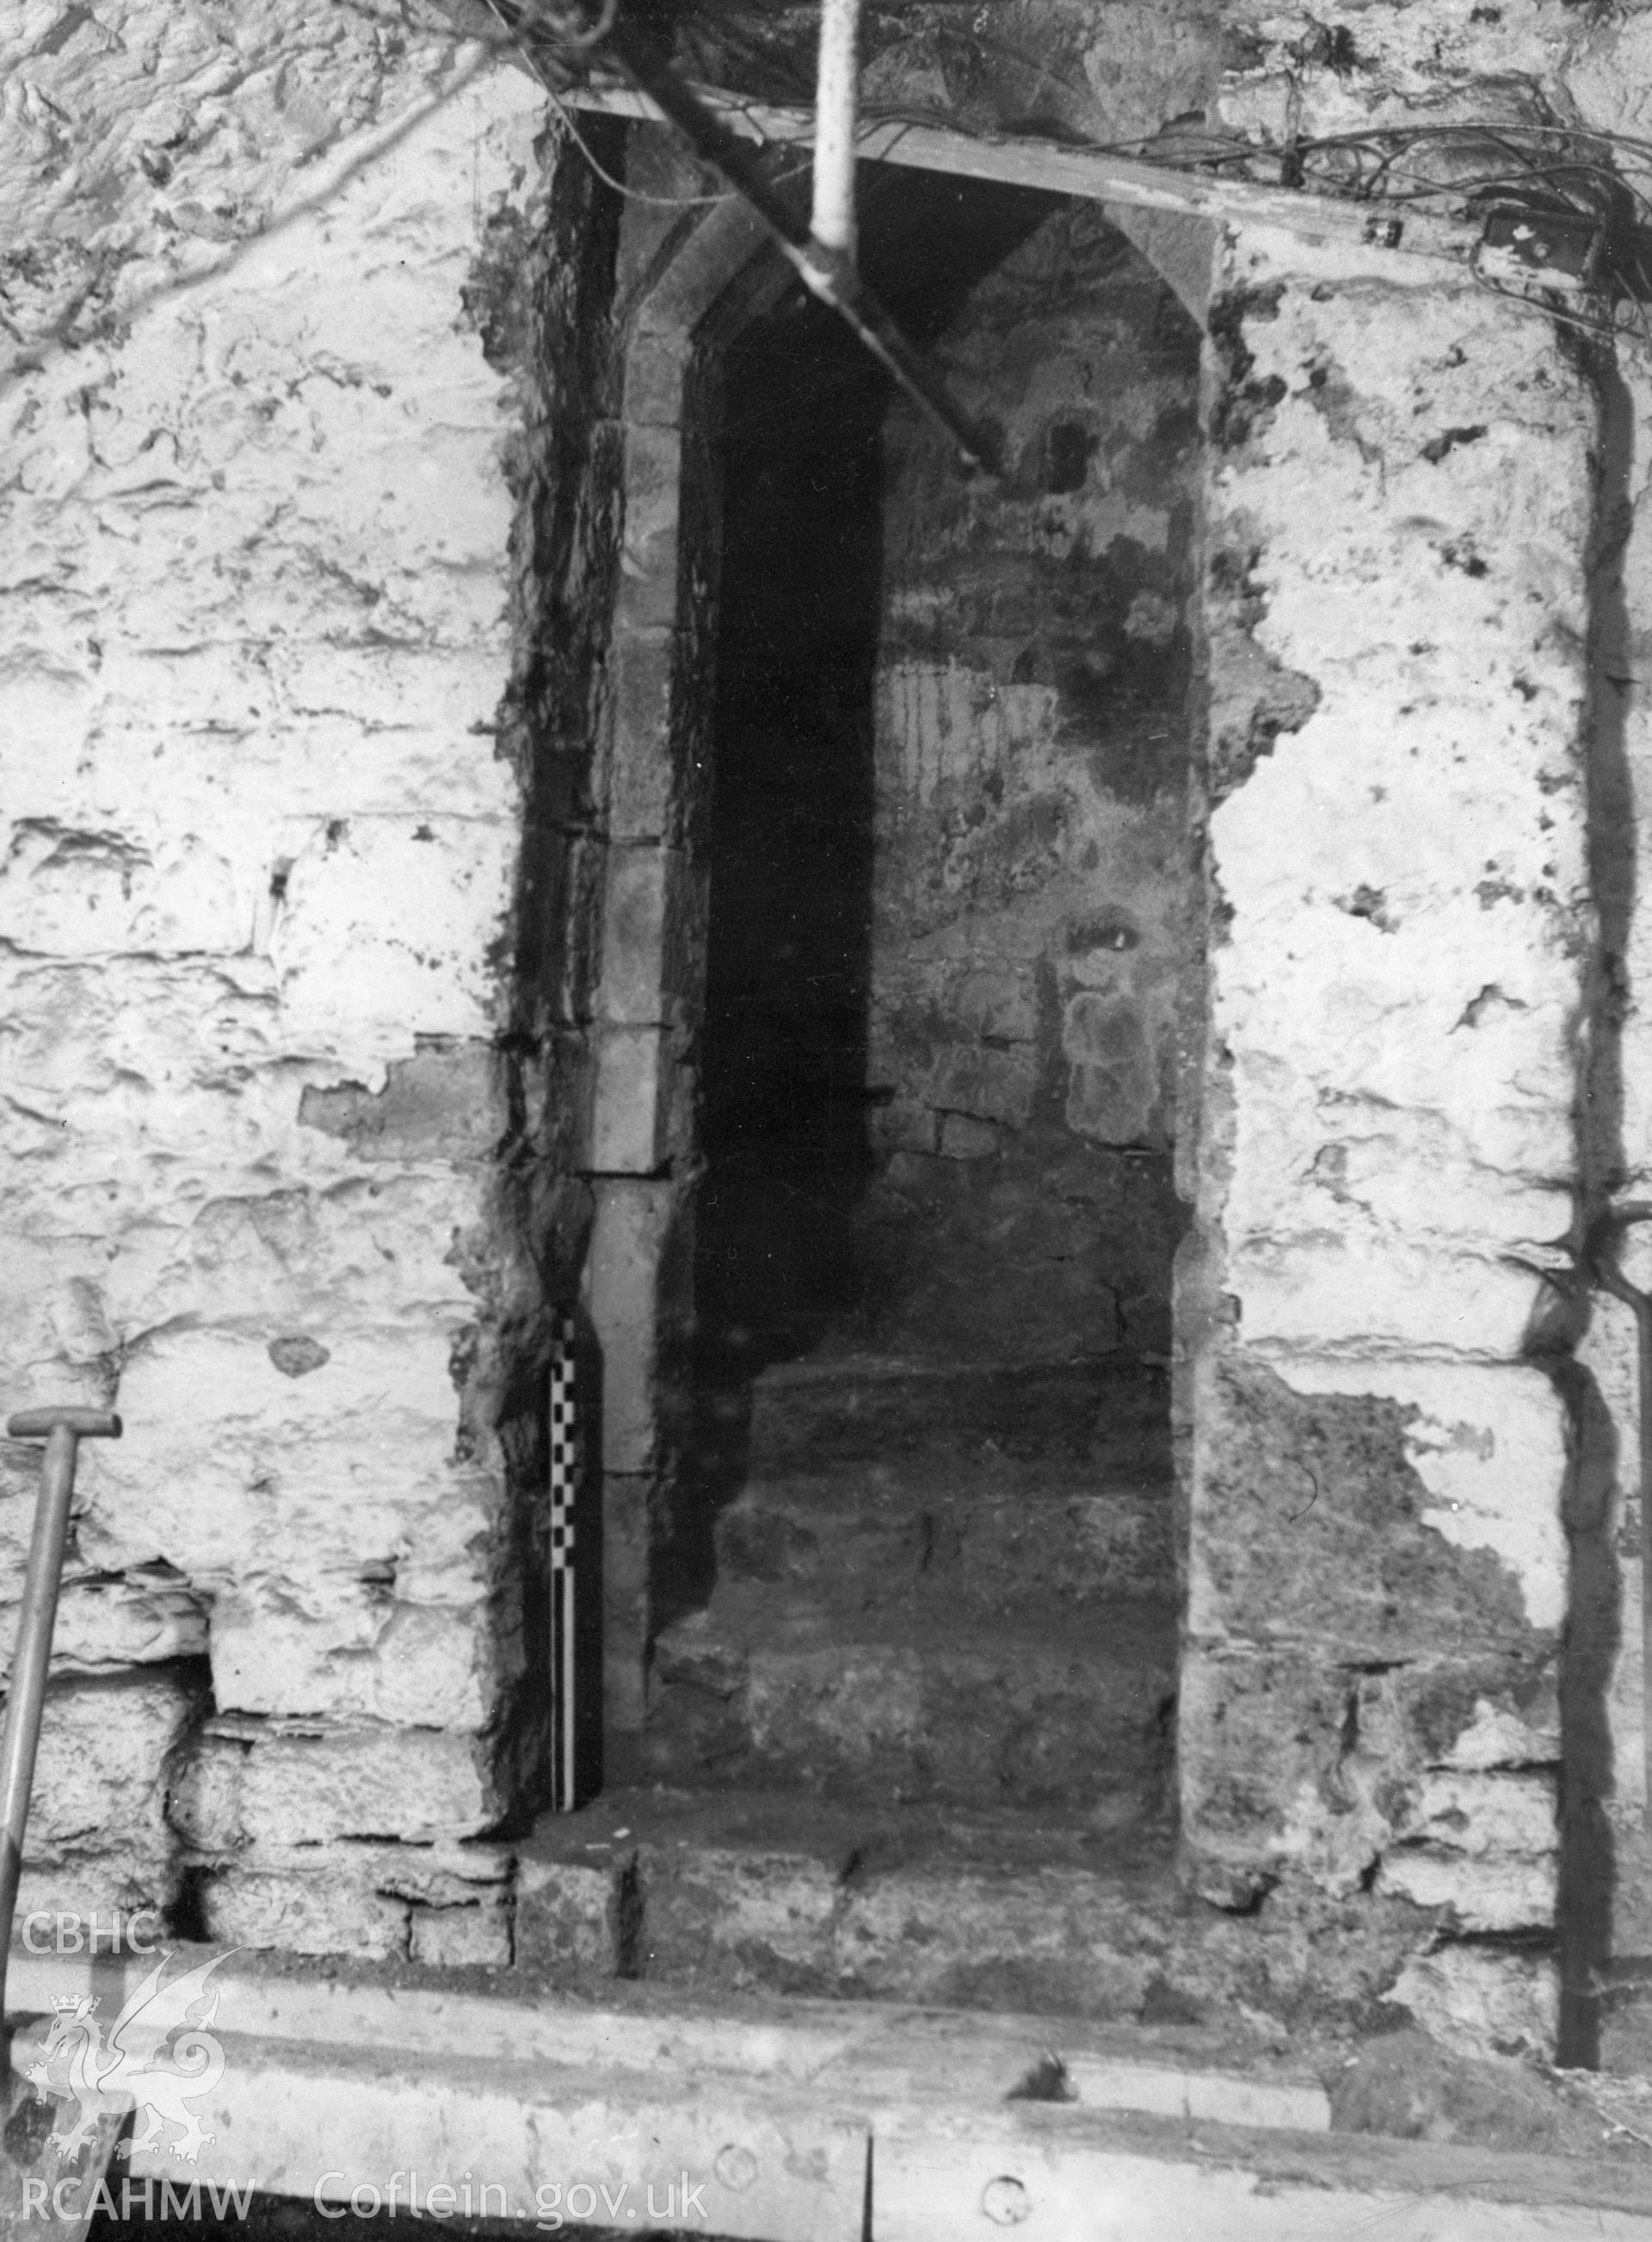 Digital copy of a view of the west doorway to the vault at Penrhyn Castle by D B Hague.